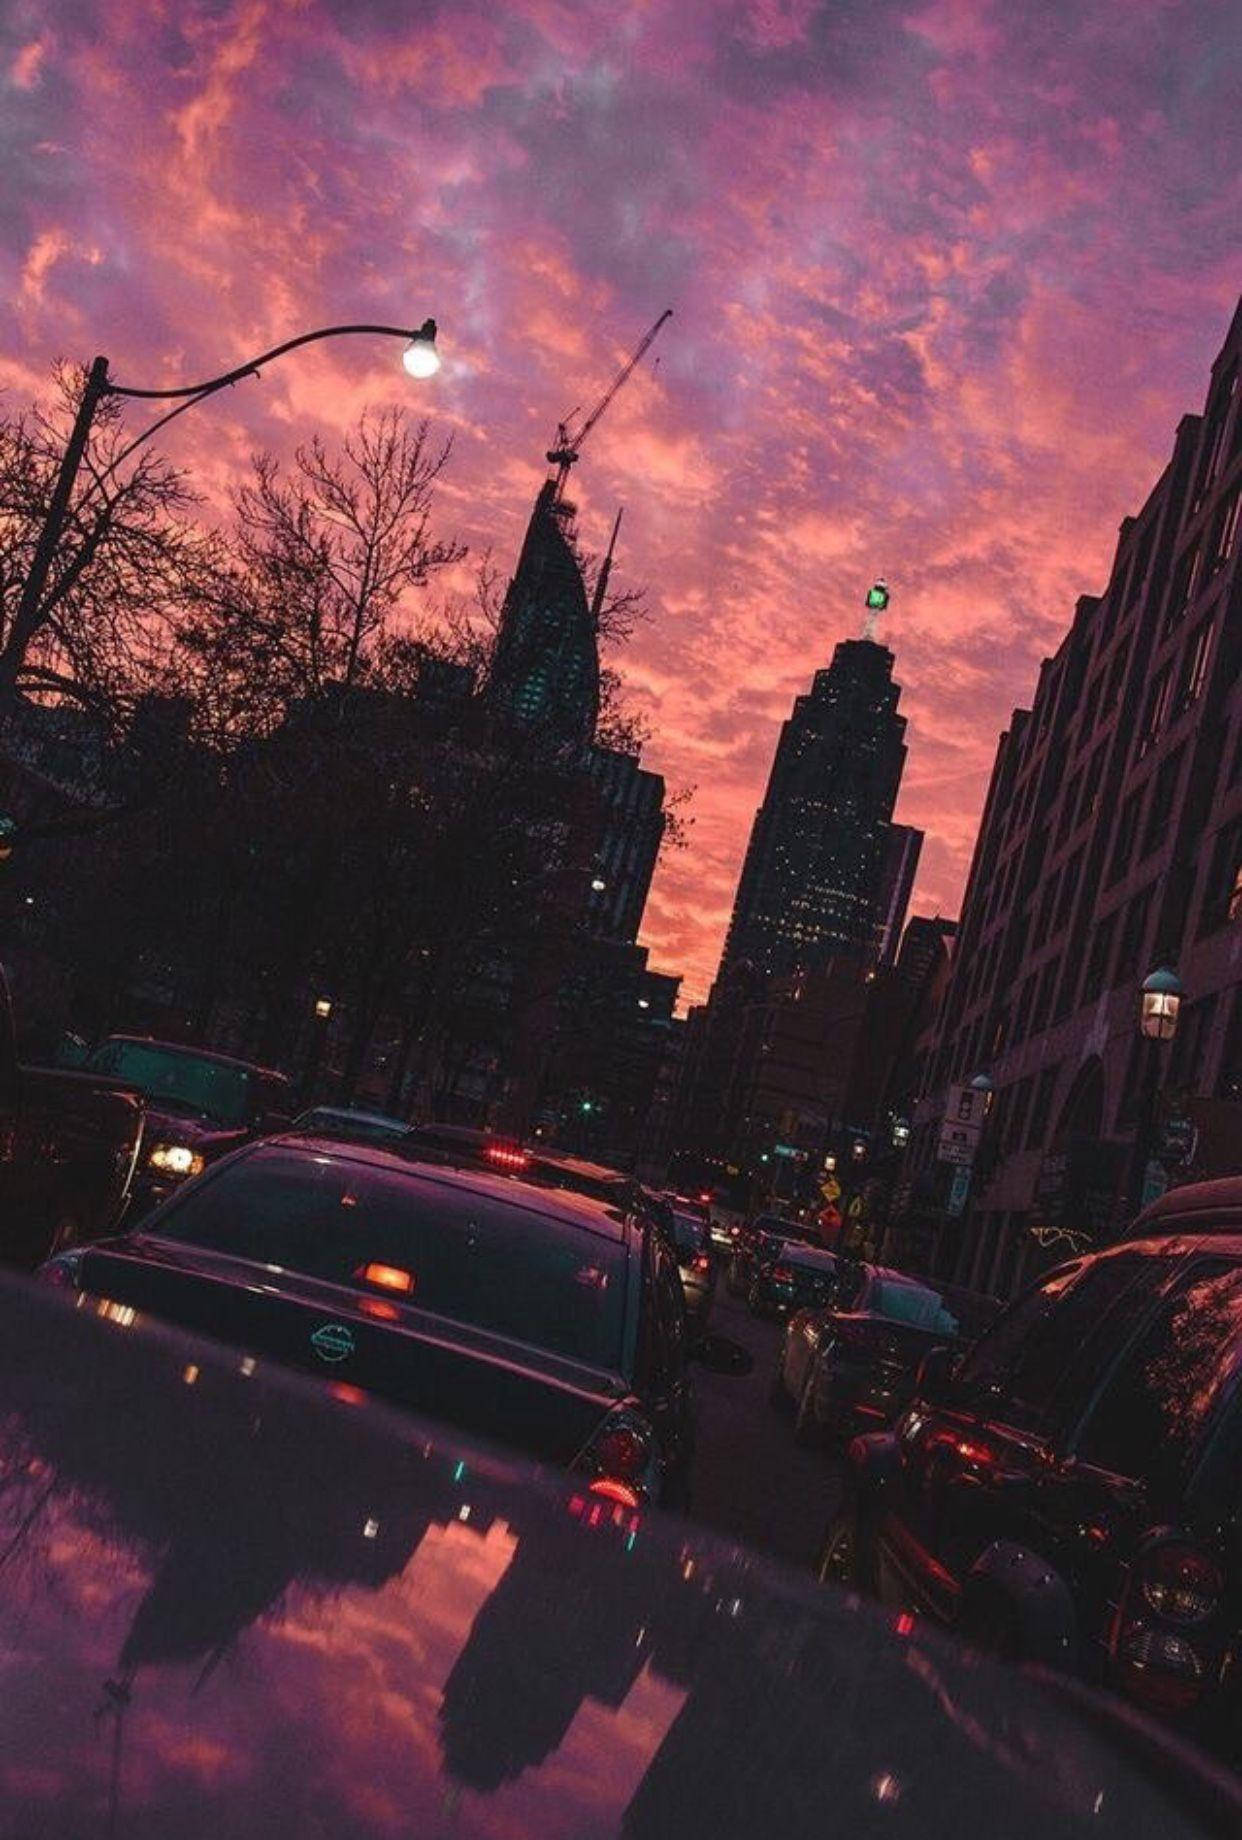 A city street with cars and tall buildings with a pink and purple sunset in the background. - Sunset